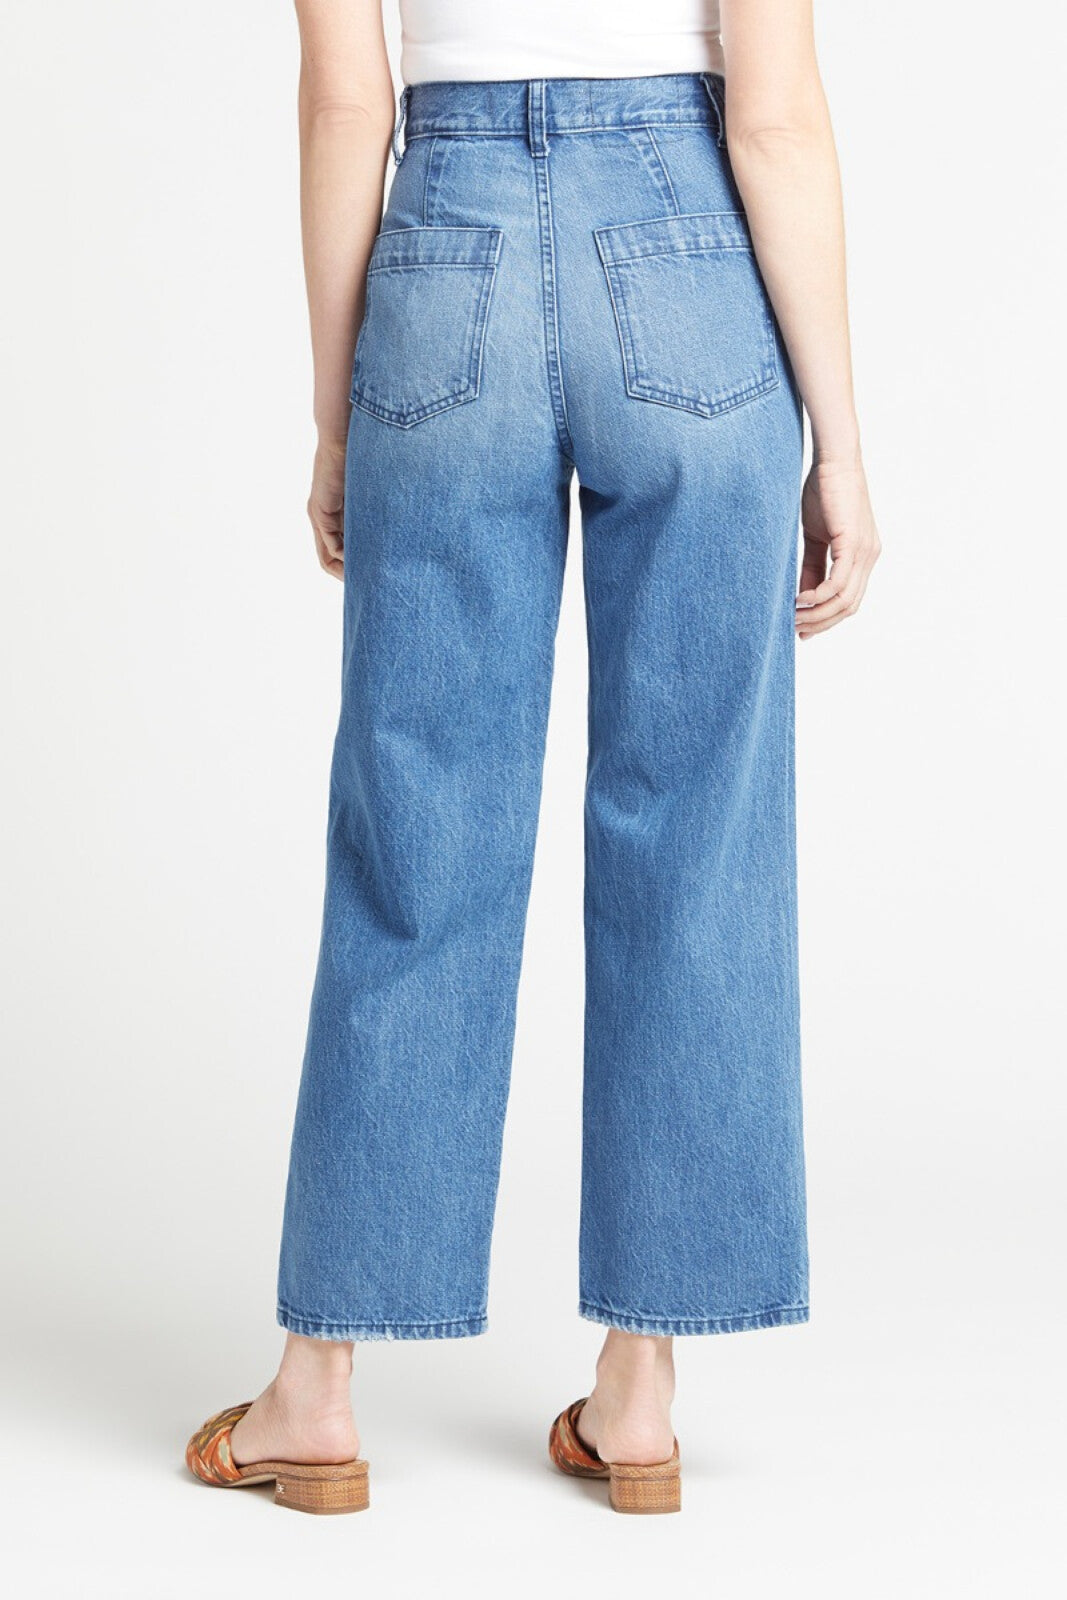 Amo Patch Pocket Jeans In Delight